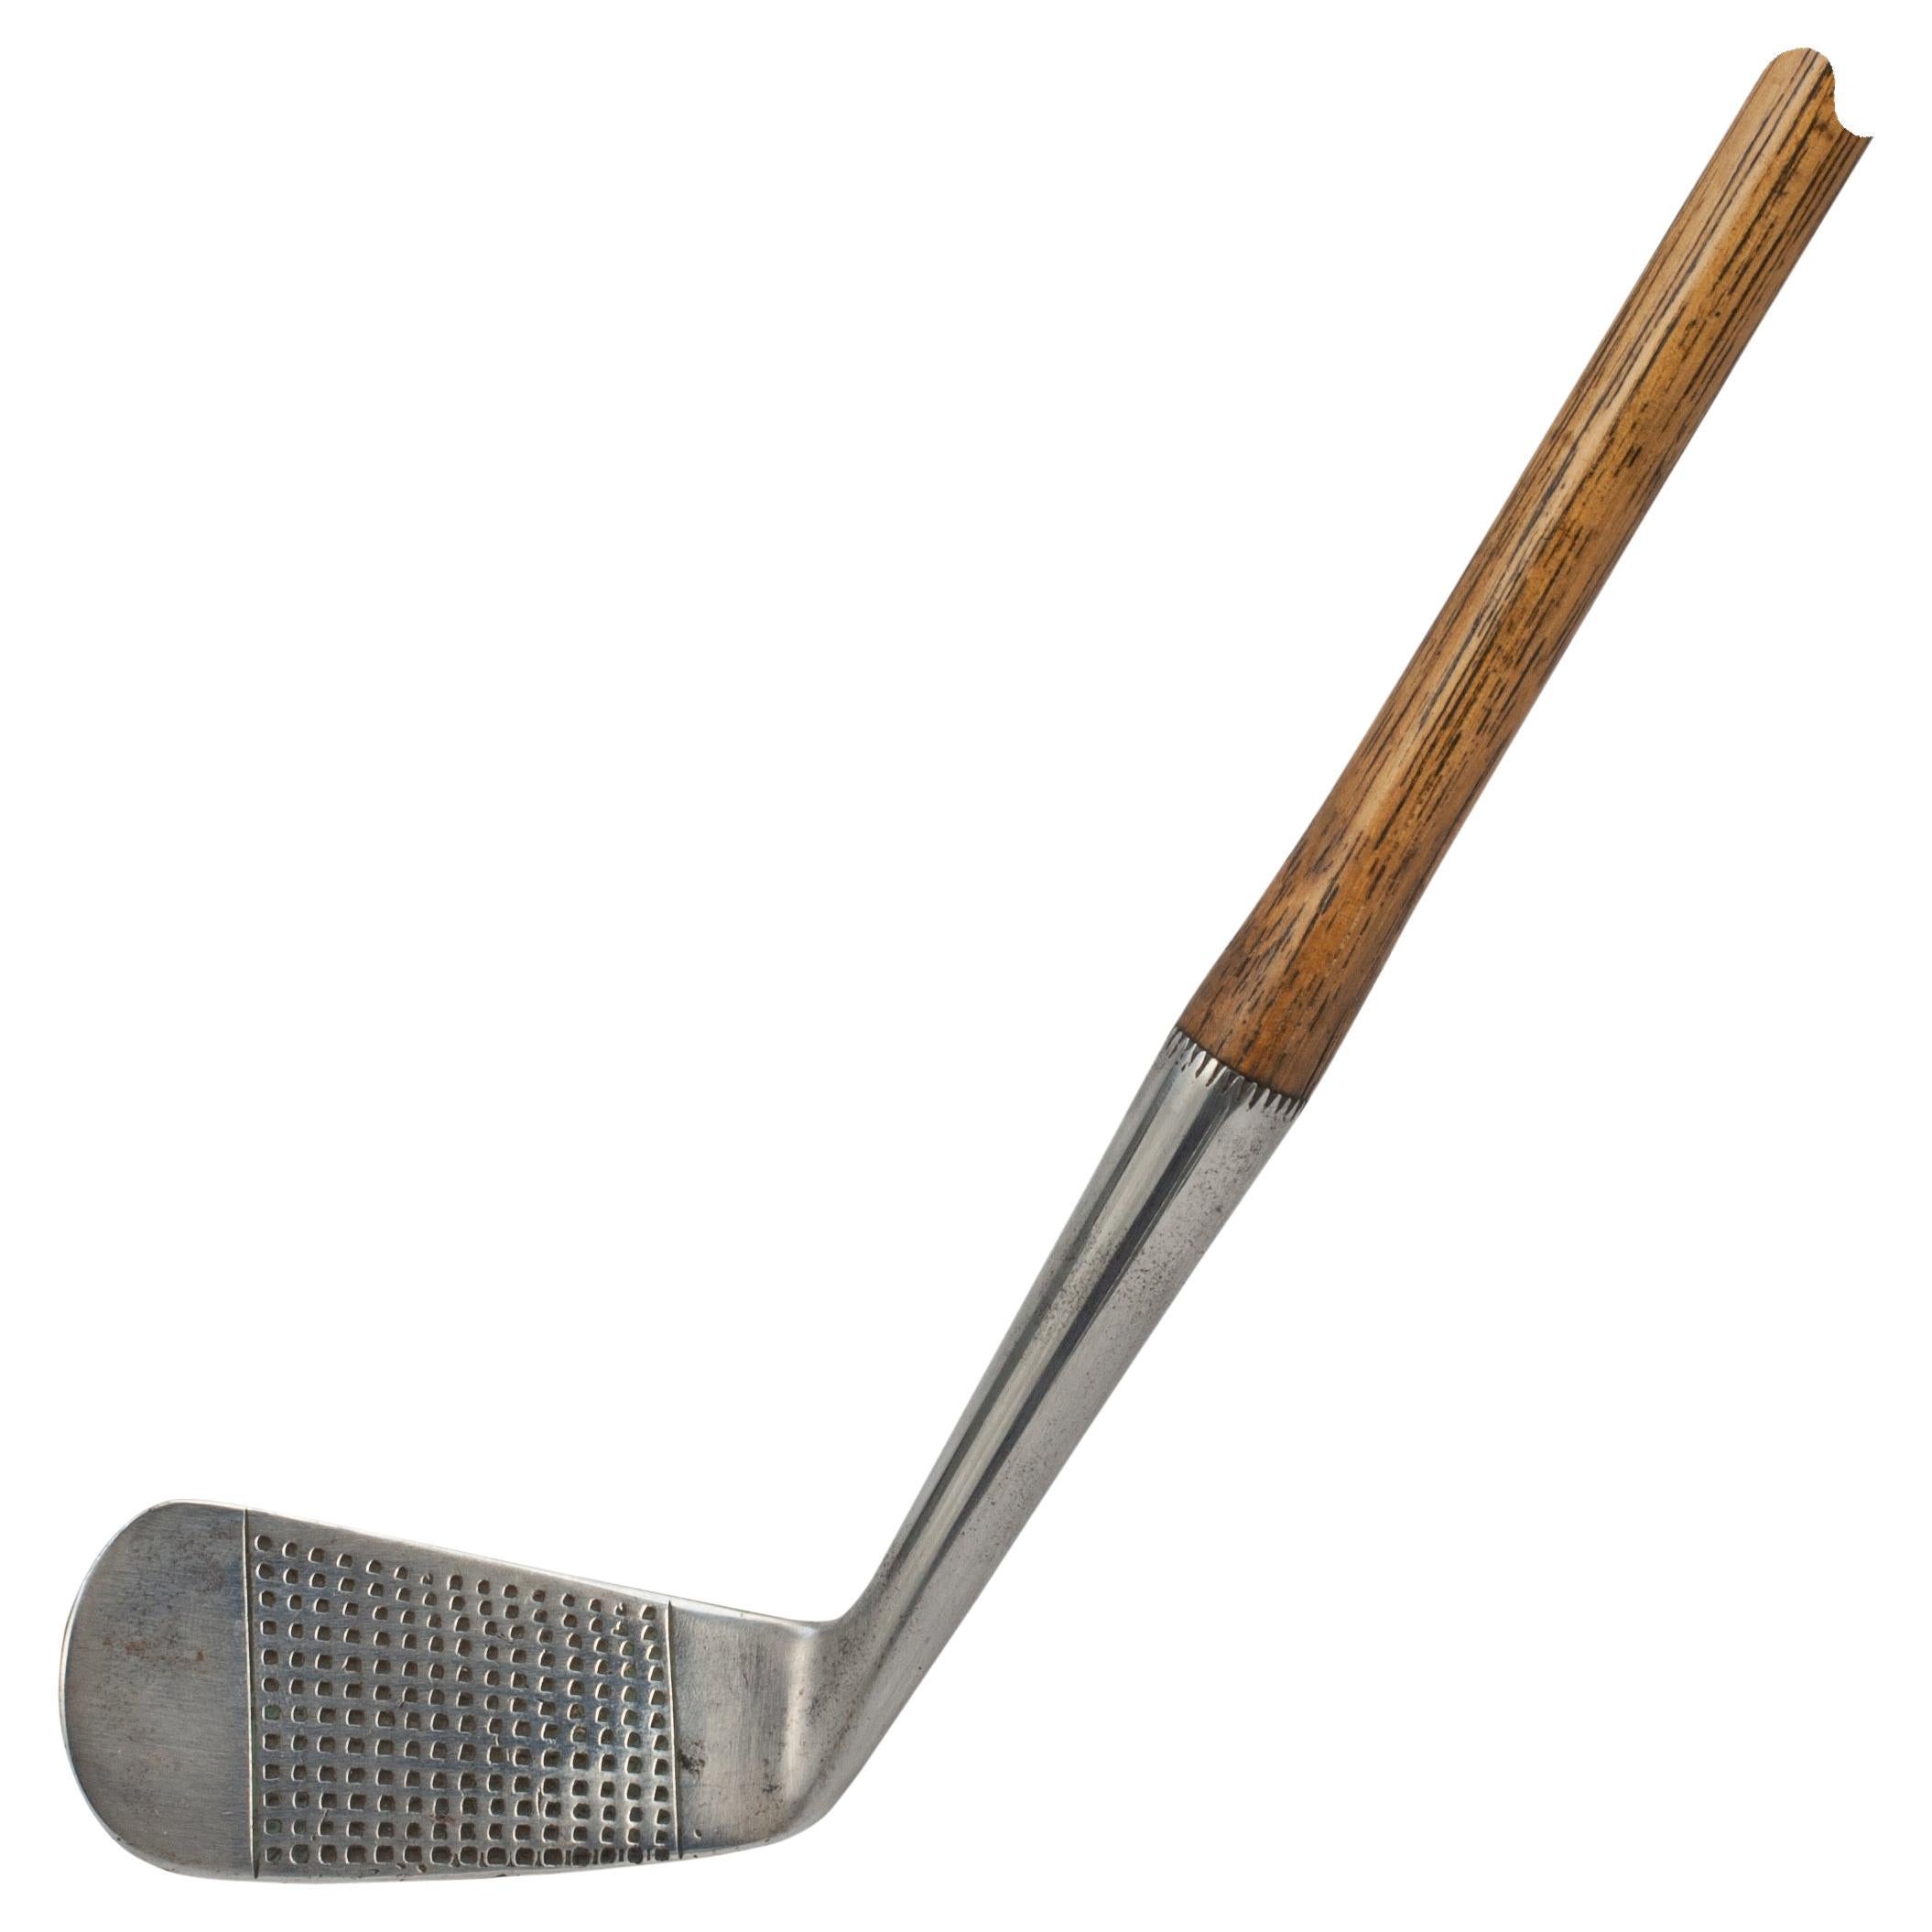 Vintage Hickory Golf Club, Mid Iron. For Sale